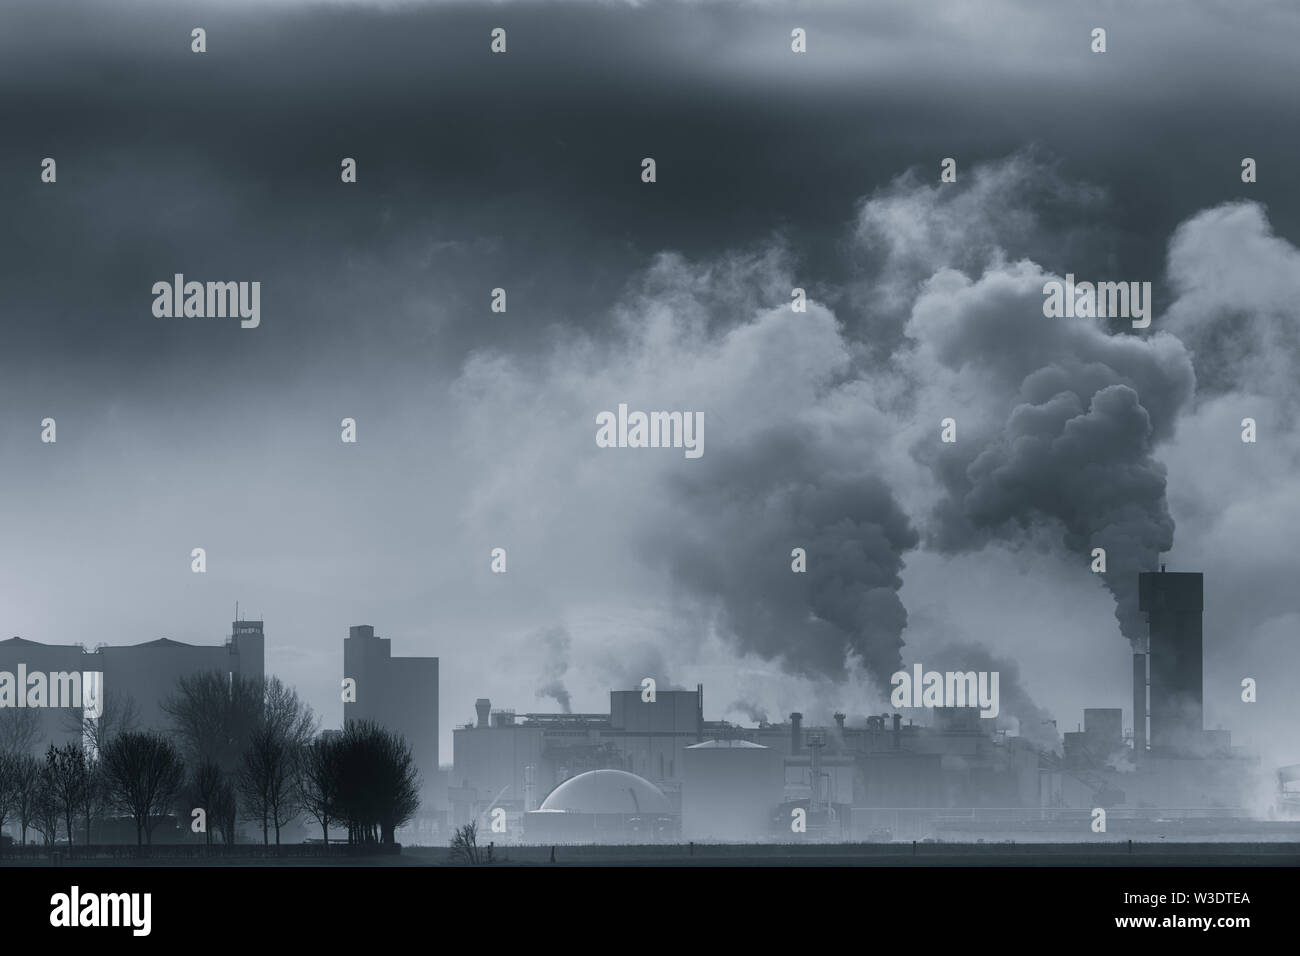 A chemical plant polluting the air and causing rising temperatures and global warming - The Netherlands Stock Photo